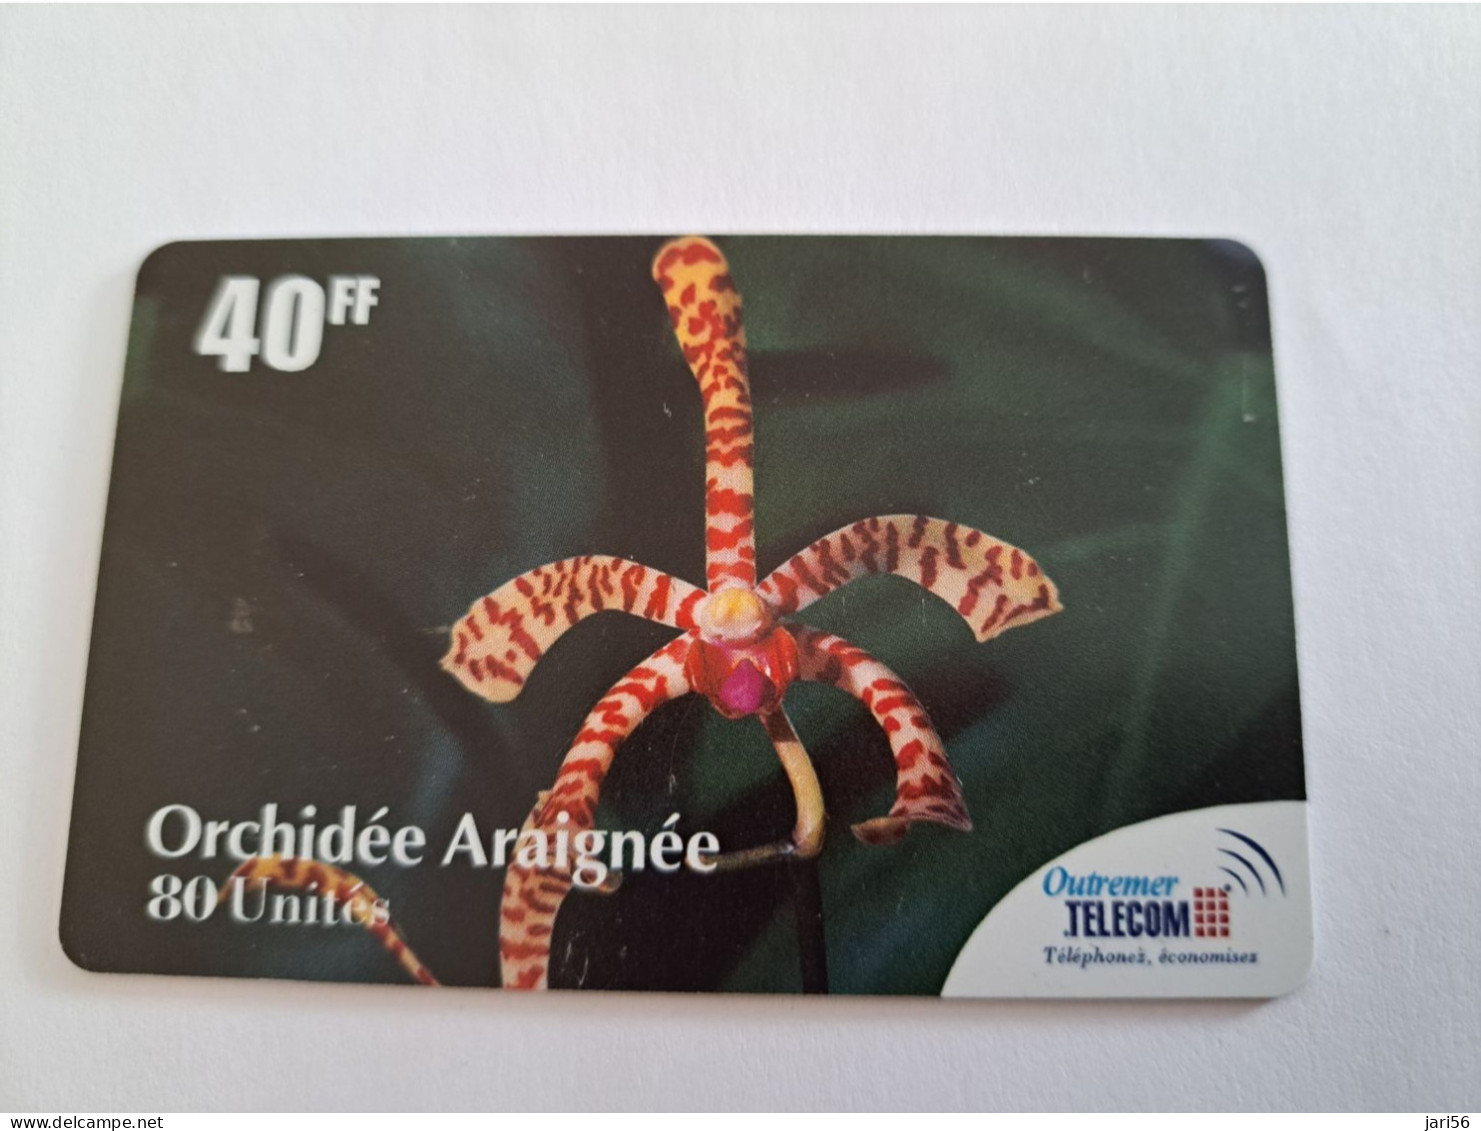 ST MARTIN  / OUTREMER/ FLOWERS/ ORCHIDEE ARAIGNEE   / 40 FF/ 80  UNITS / ANTF-OT51  FINE USED CARD    ** 13919 ** - Antilles (Françaises)